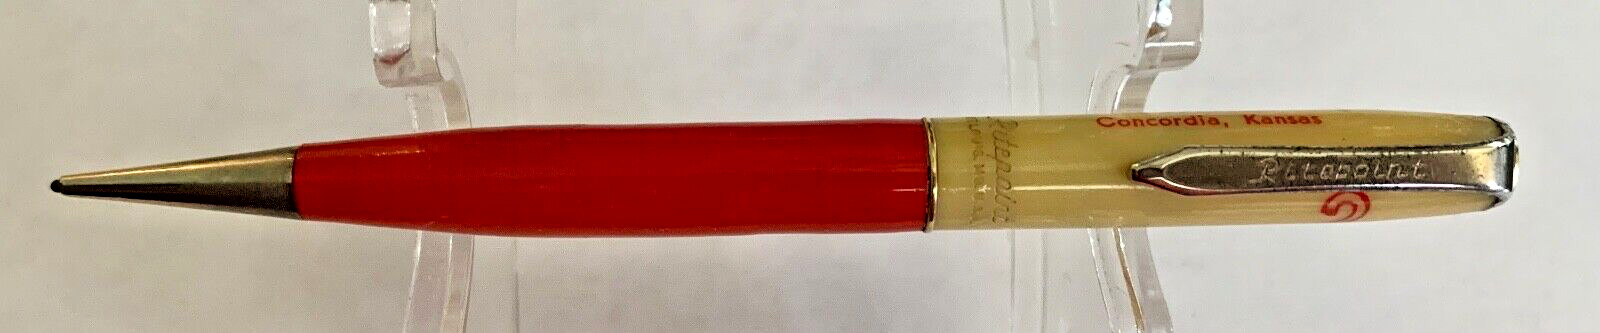 VINTAGE RITEPOINT 268 ADVERTISING MECHANICAL PENCIL, RED/CREAM W/ CHROME, 1960'S